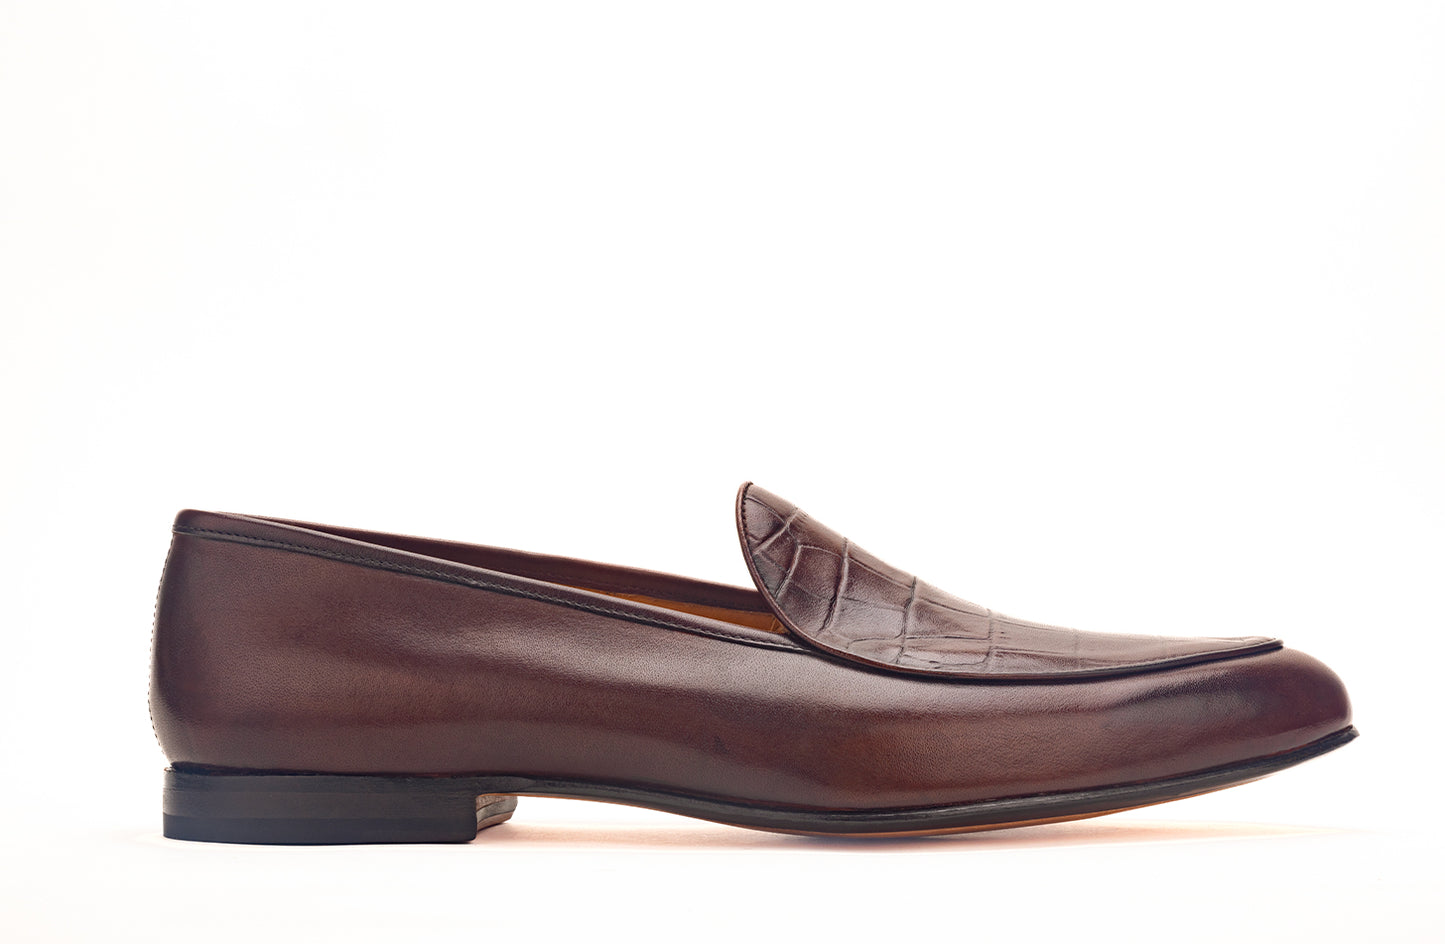 Belgian Loafer with Croc embossed apron